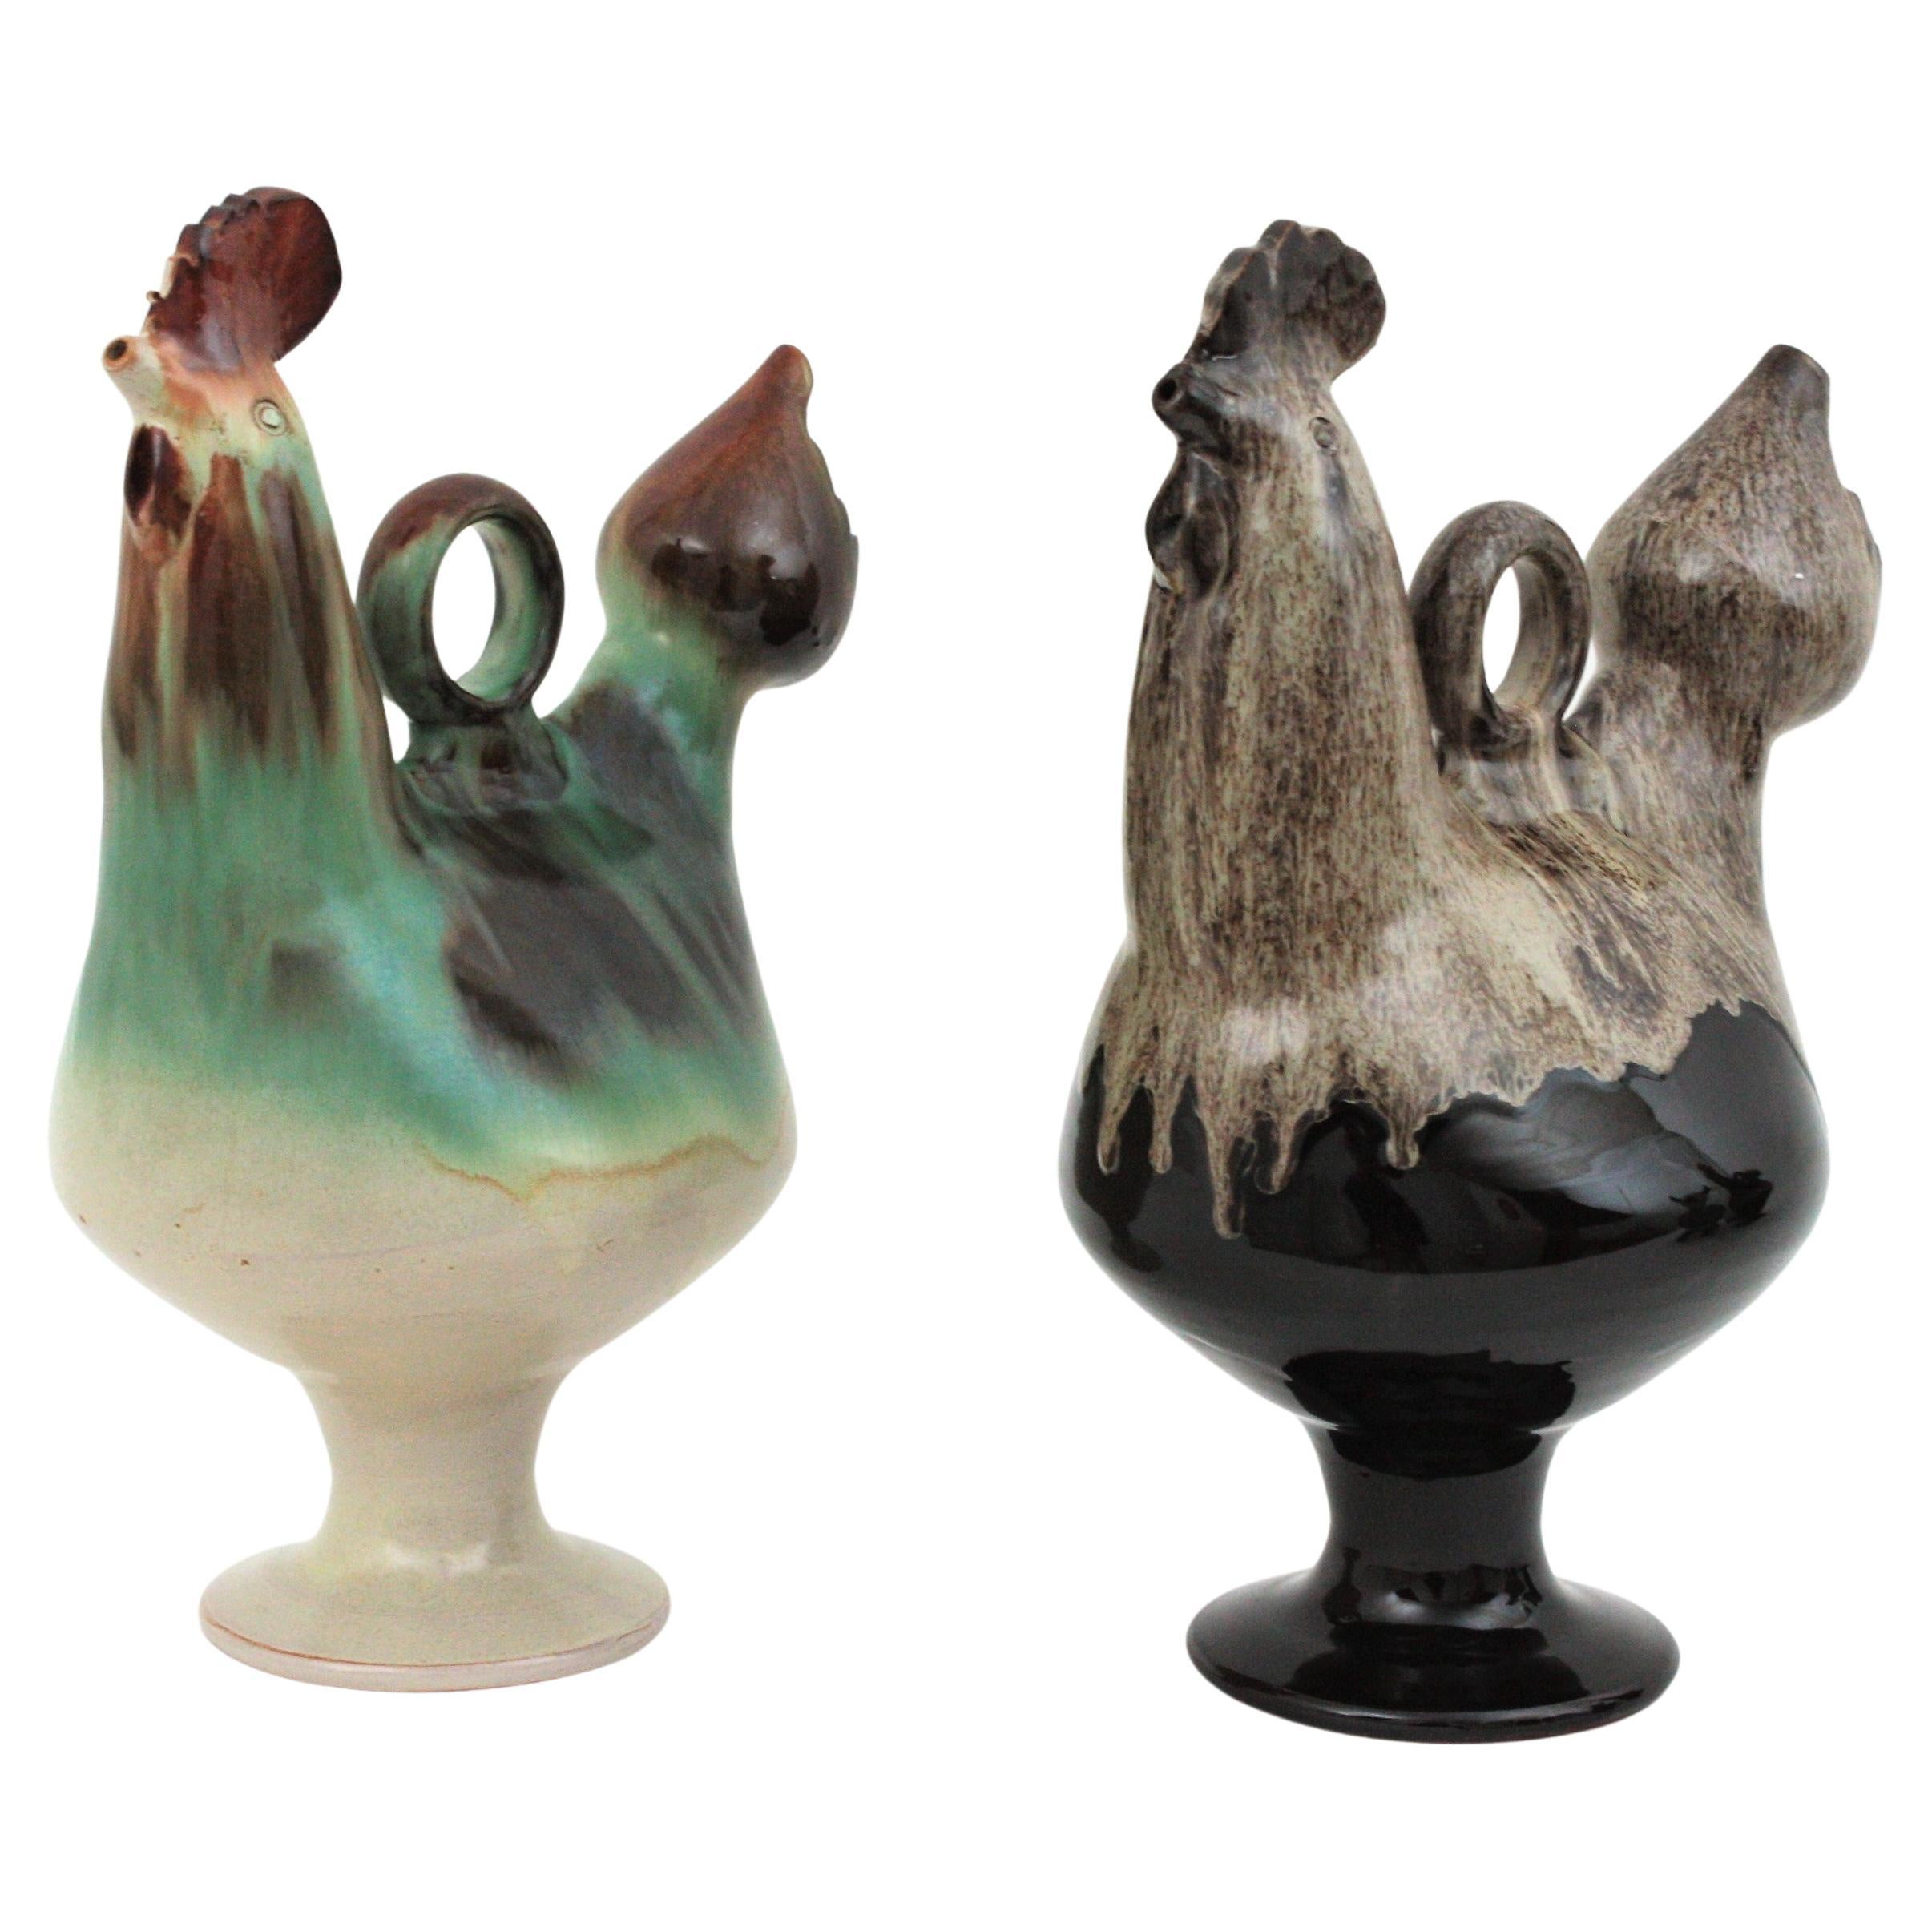 Unmatching Pair of Rooster Glazed Ceramic Pitchers, Spain, 1970s